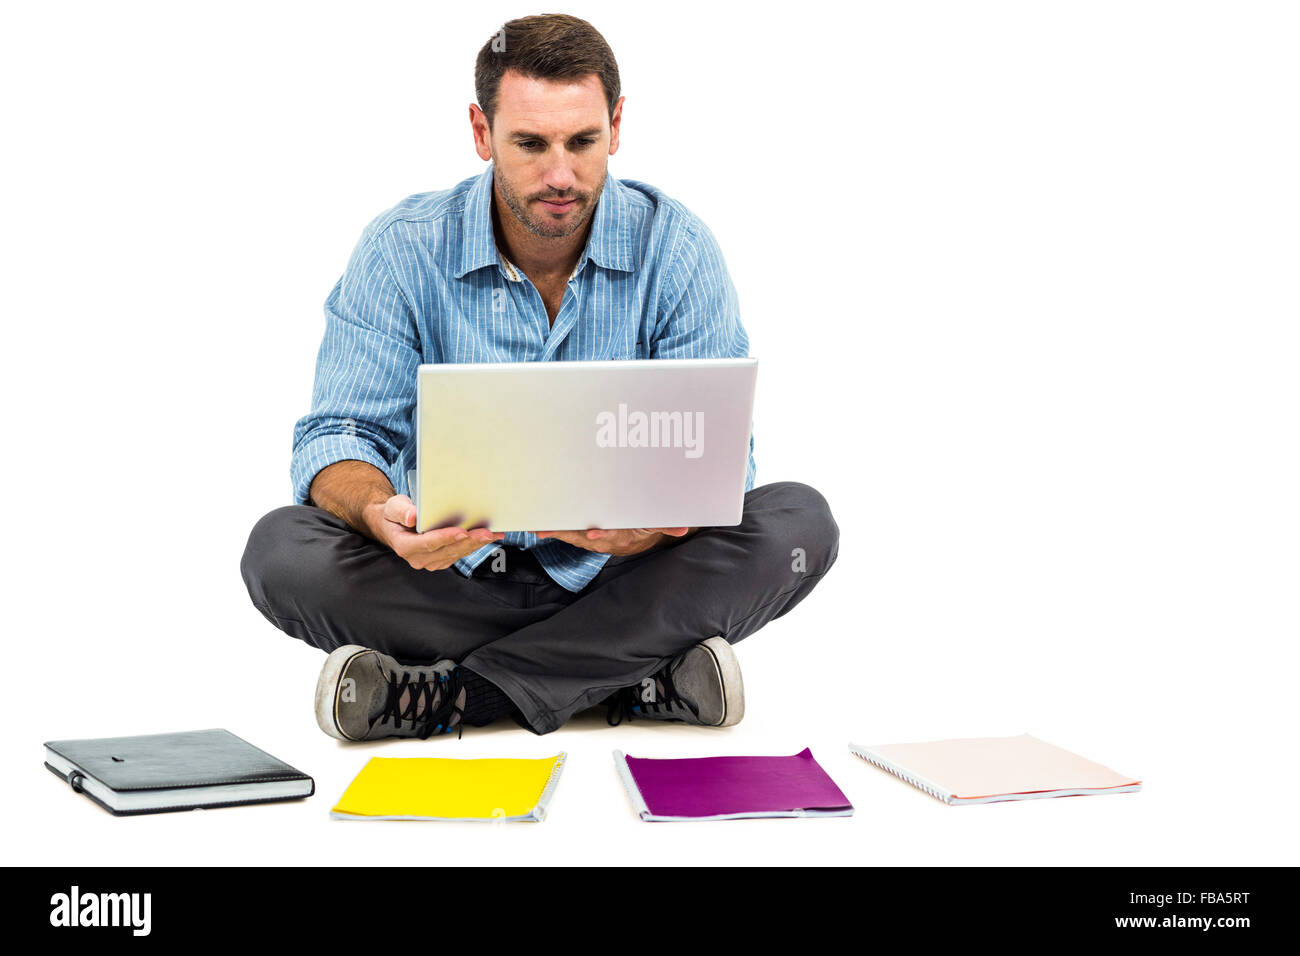 Man sitting on floor using laptop with notepads on floor Stock Photo